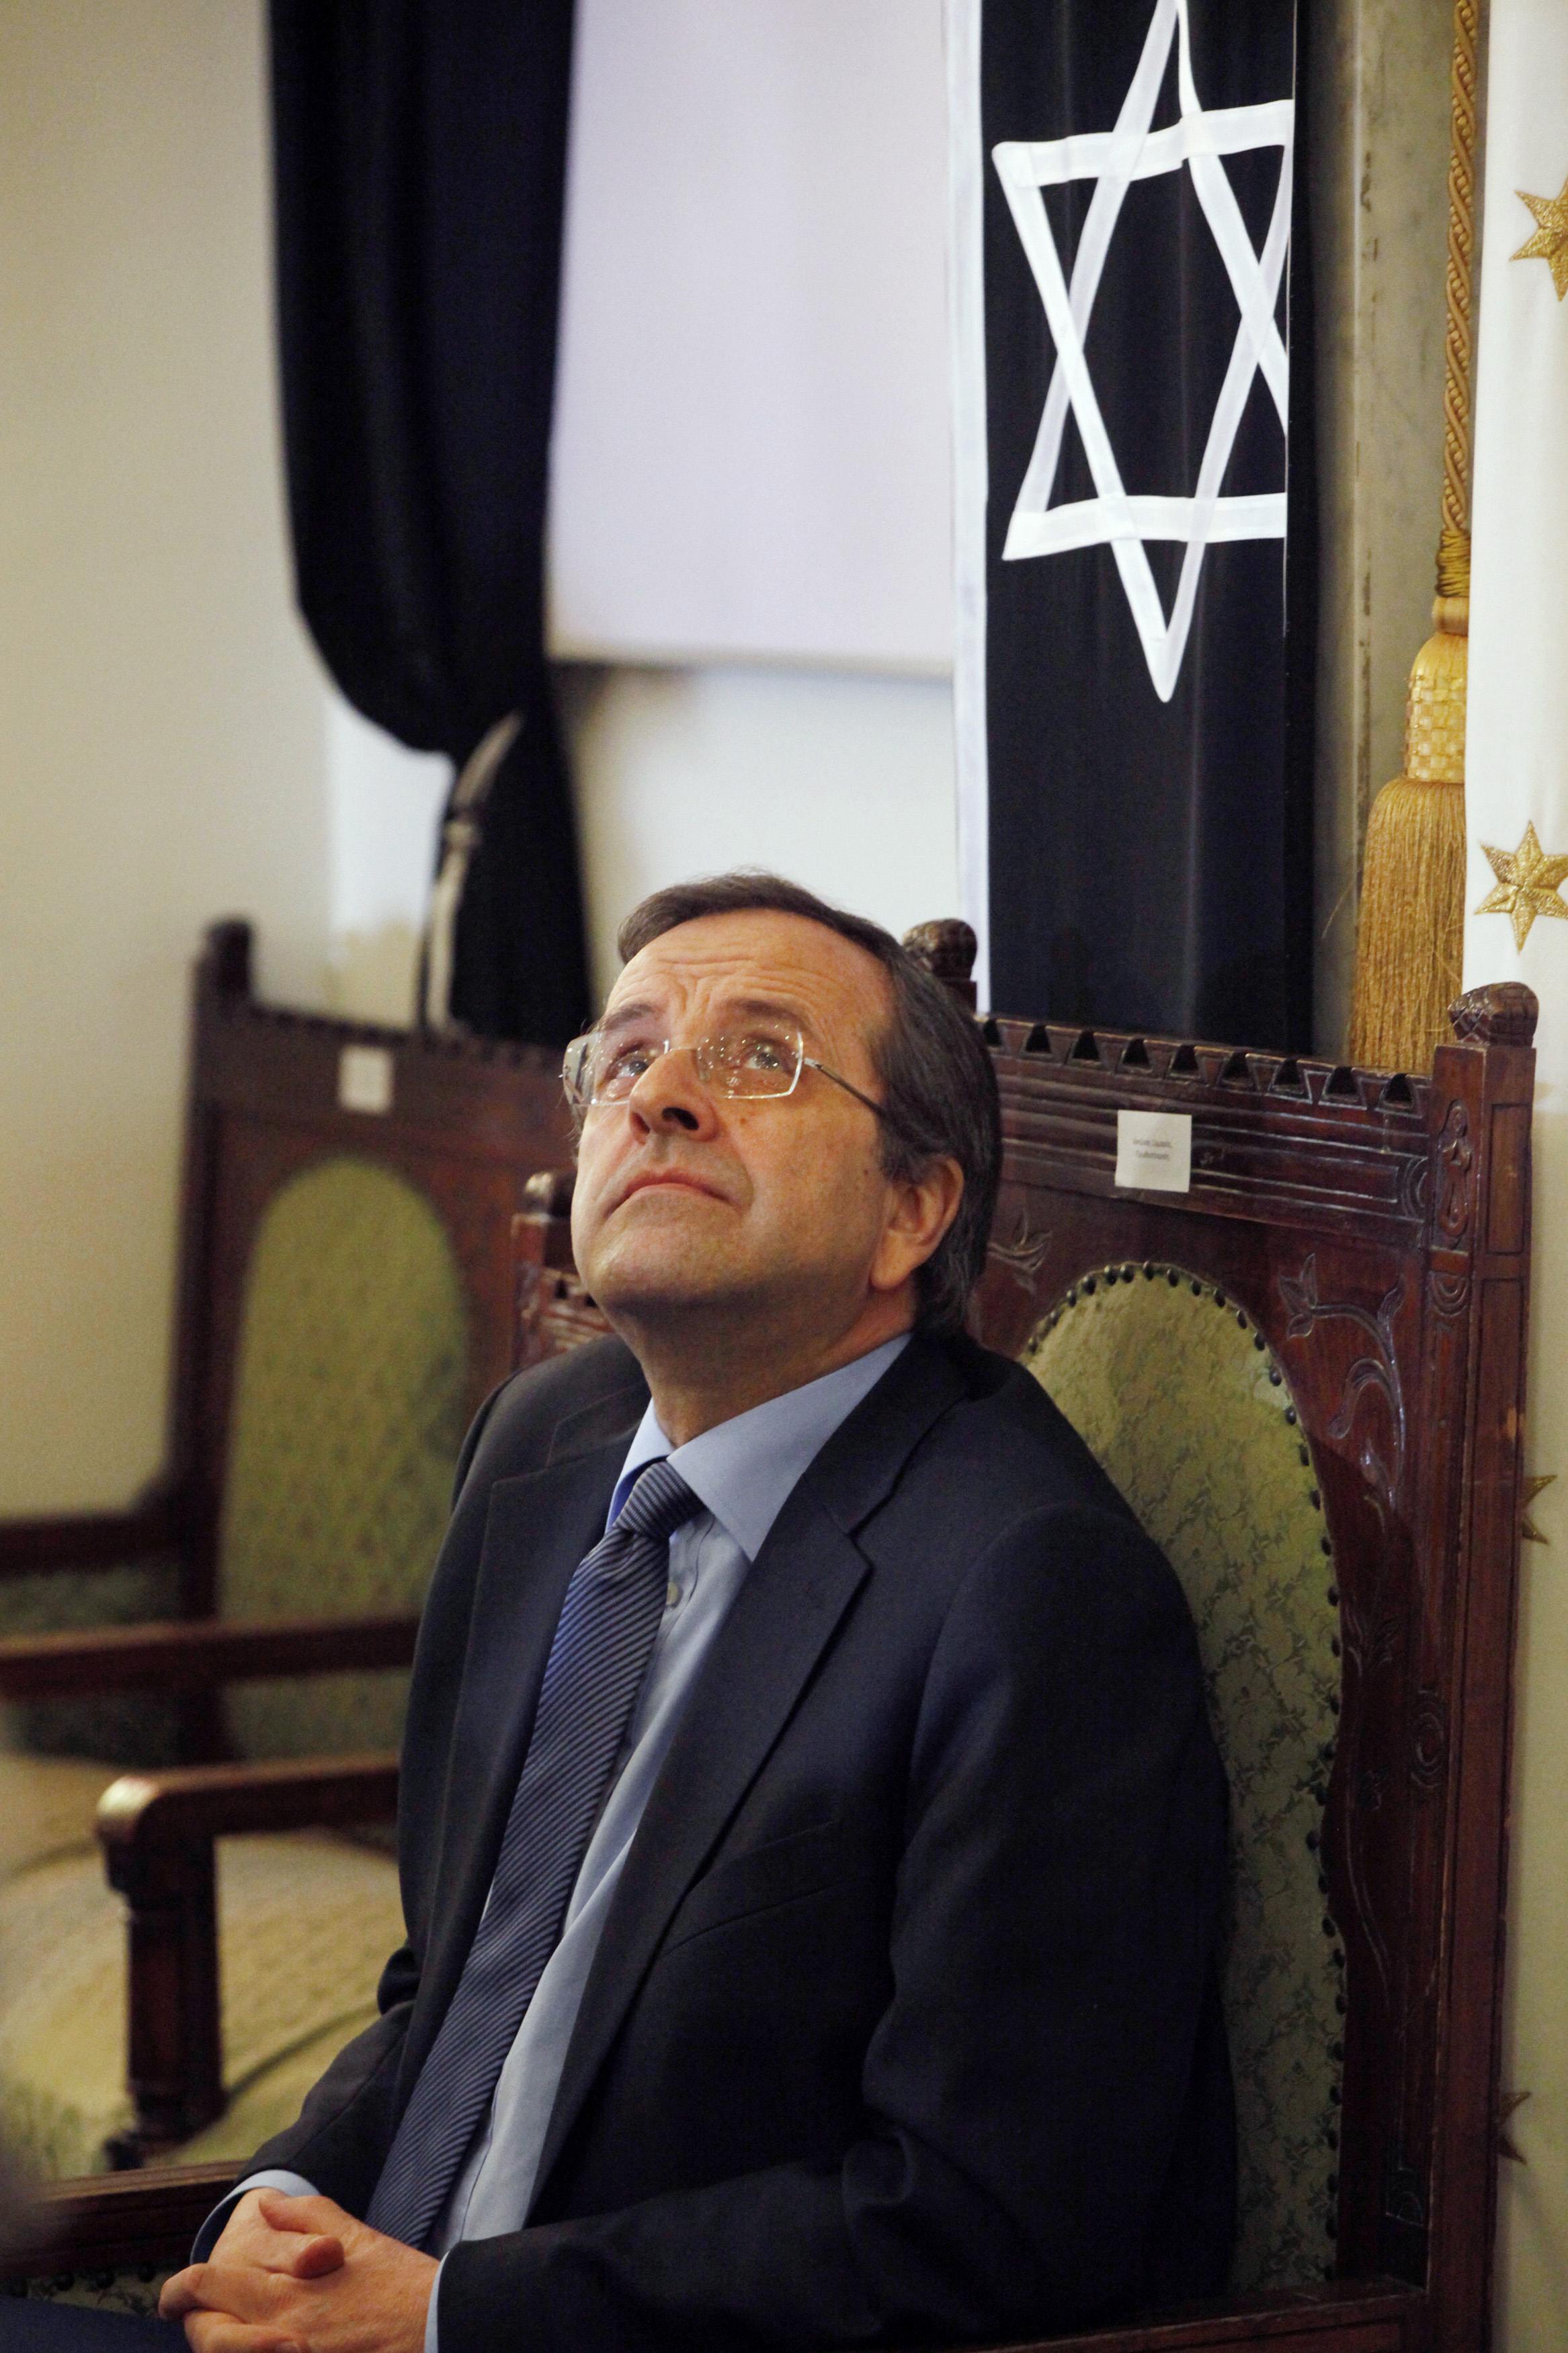 Greece's Prime Minister Antonis Samaras attends a ceremony marking the 70th anniversary of the first deportation of Jews from Thessaloniki to Auschwitz inside the Monastirioton synagogue